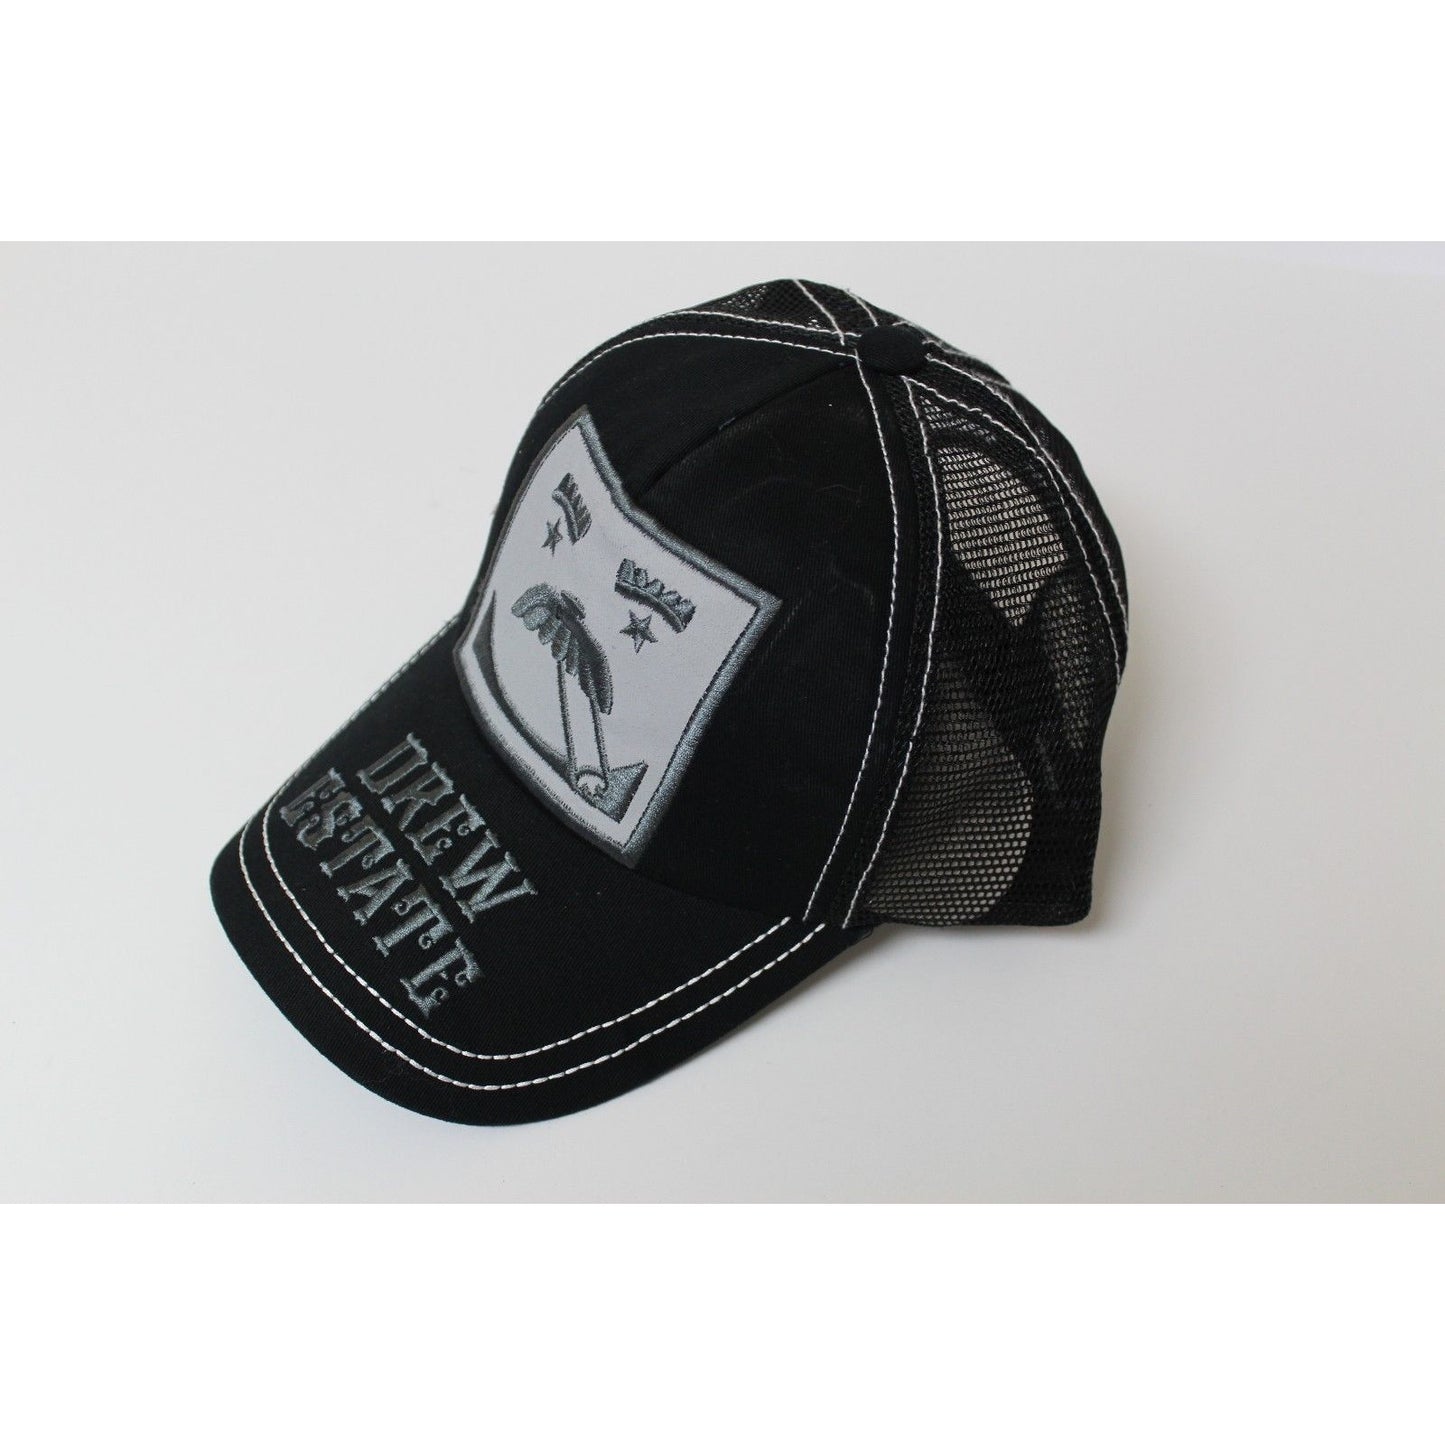 Black & Gray embroidered hat